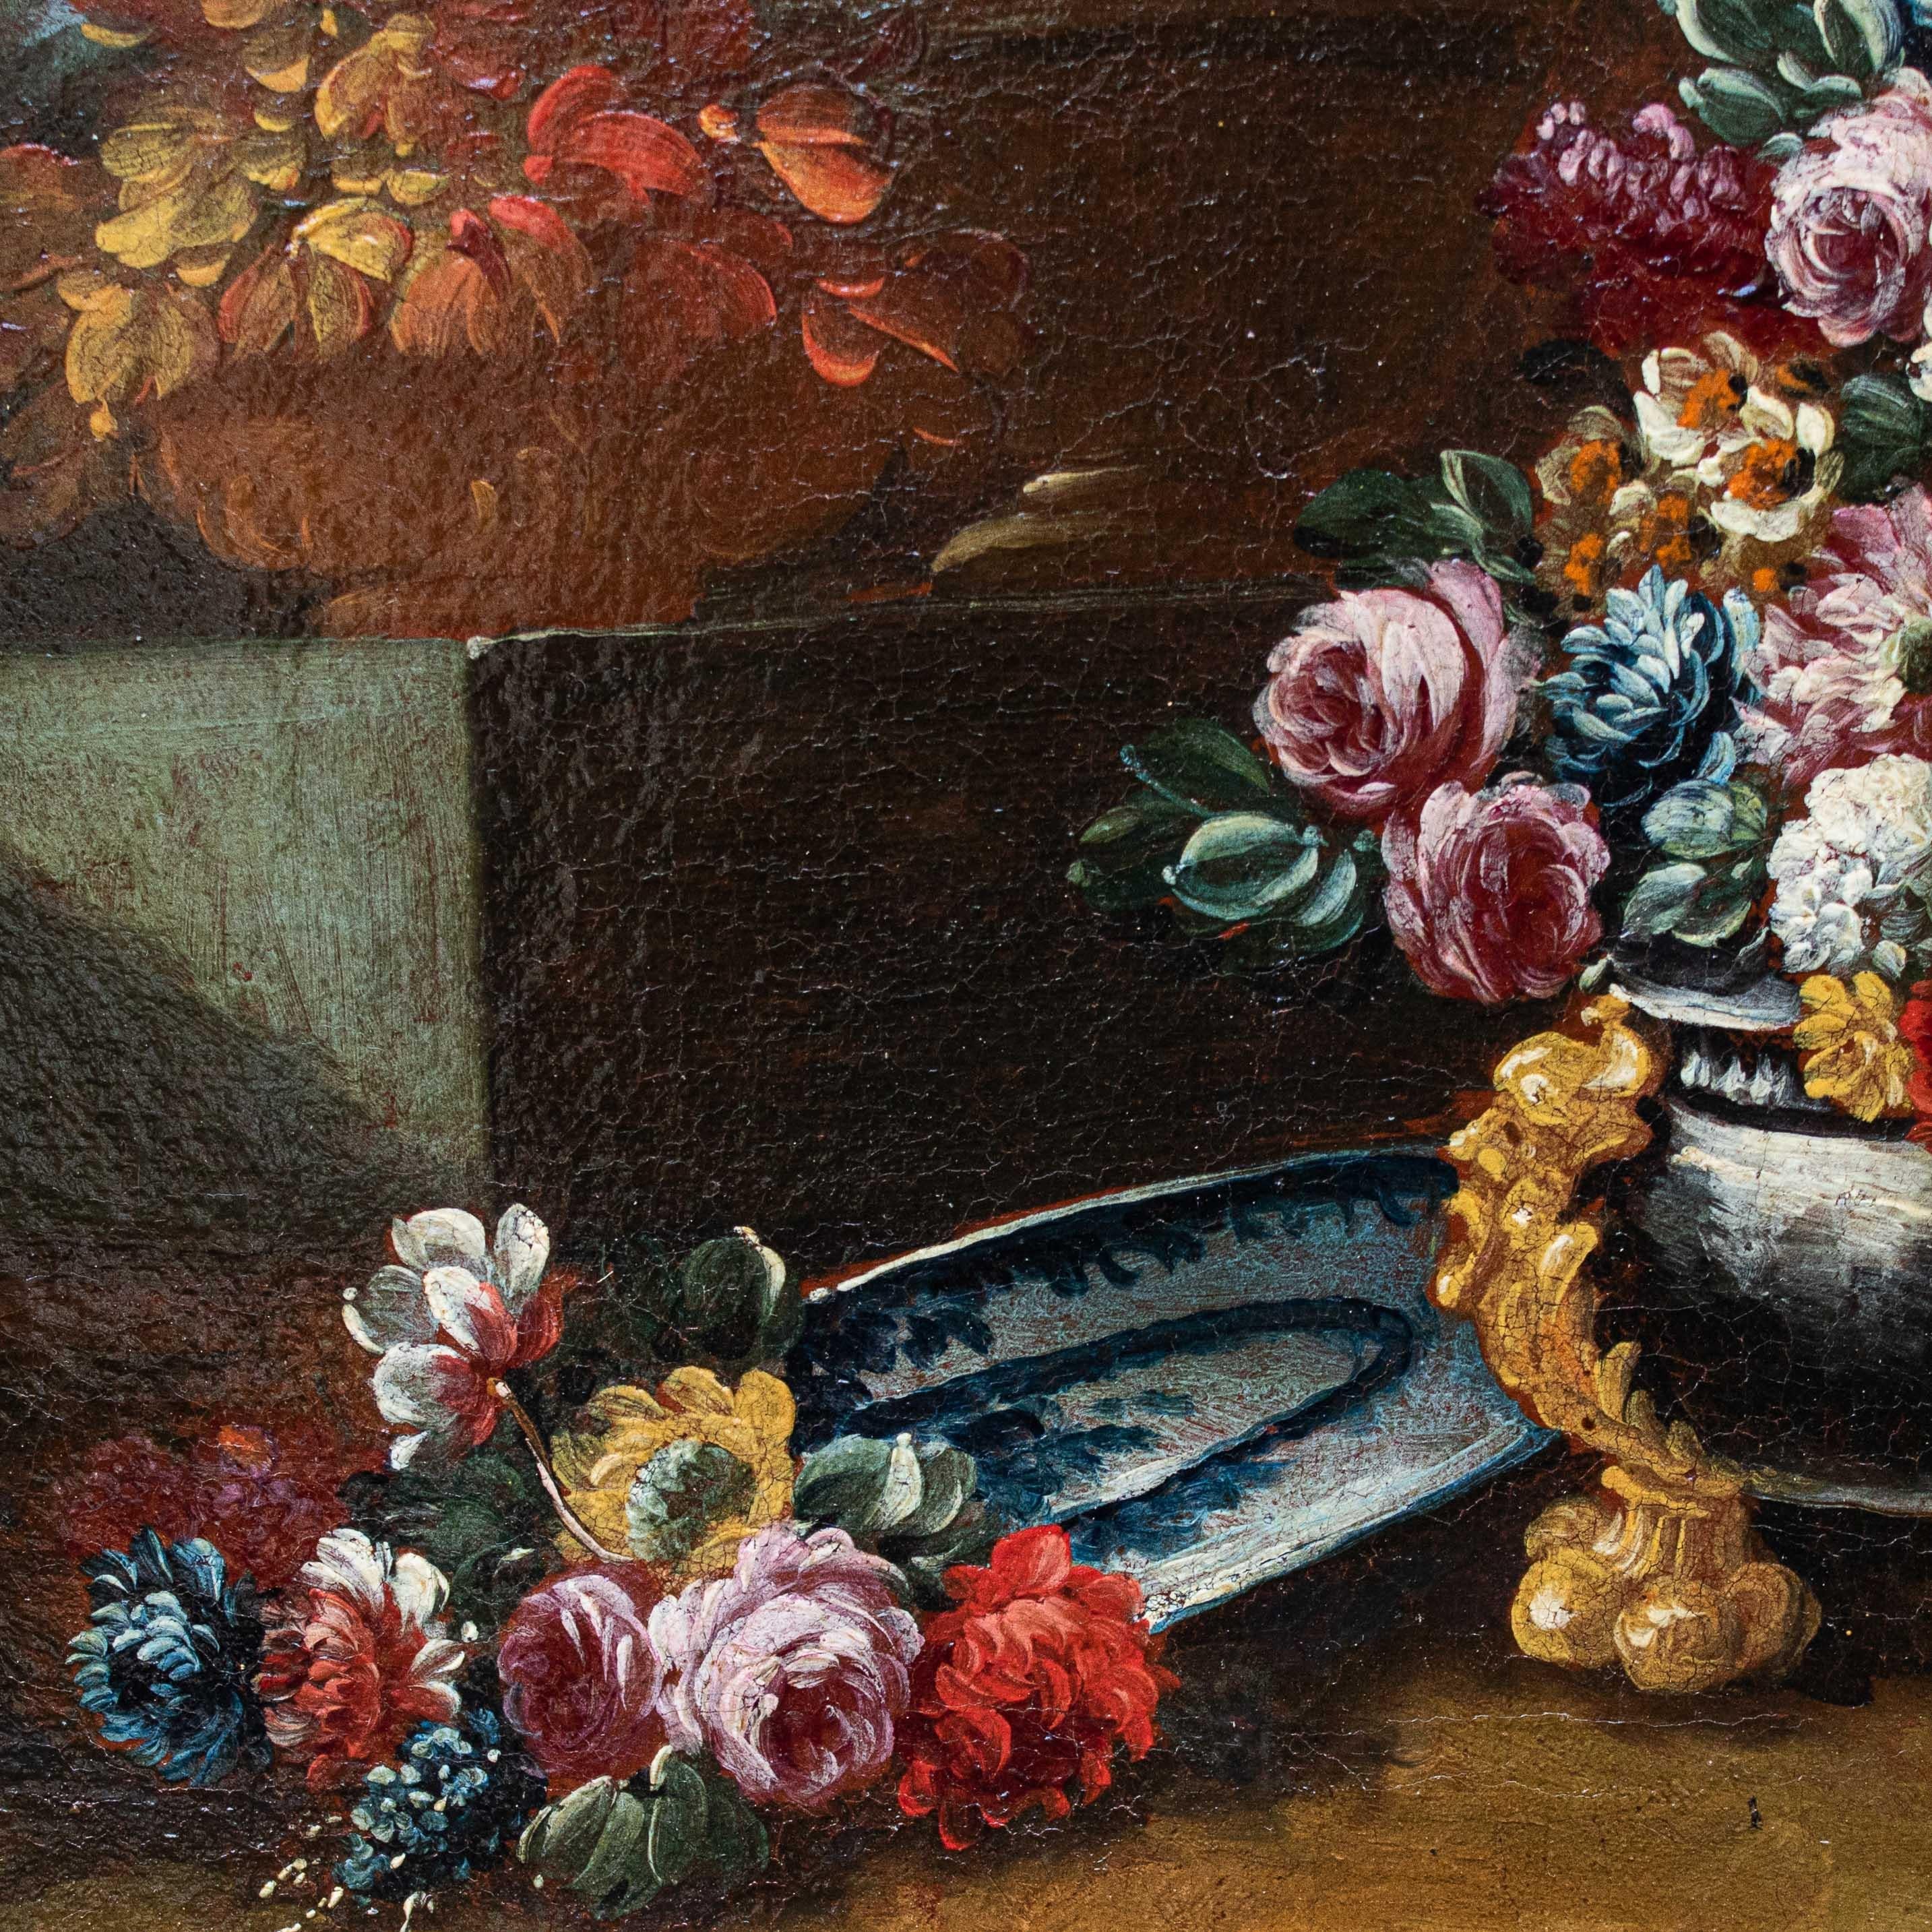 Oiled 18th Century Still Life with Flower by Giacomo Nani Naples Old Masters